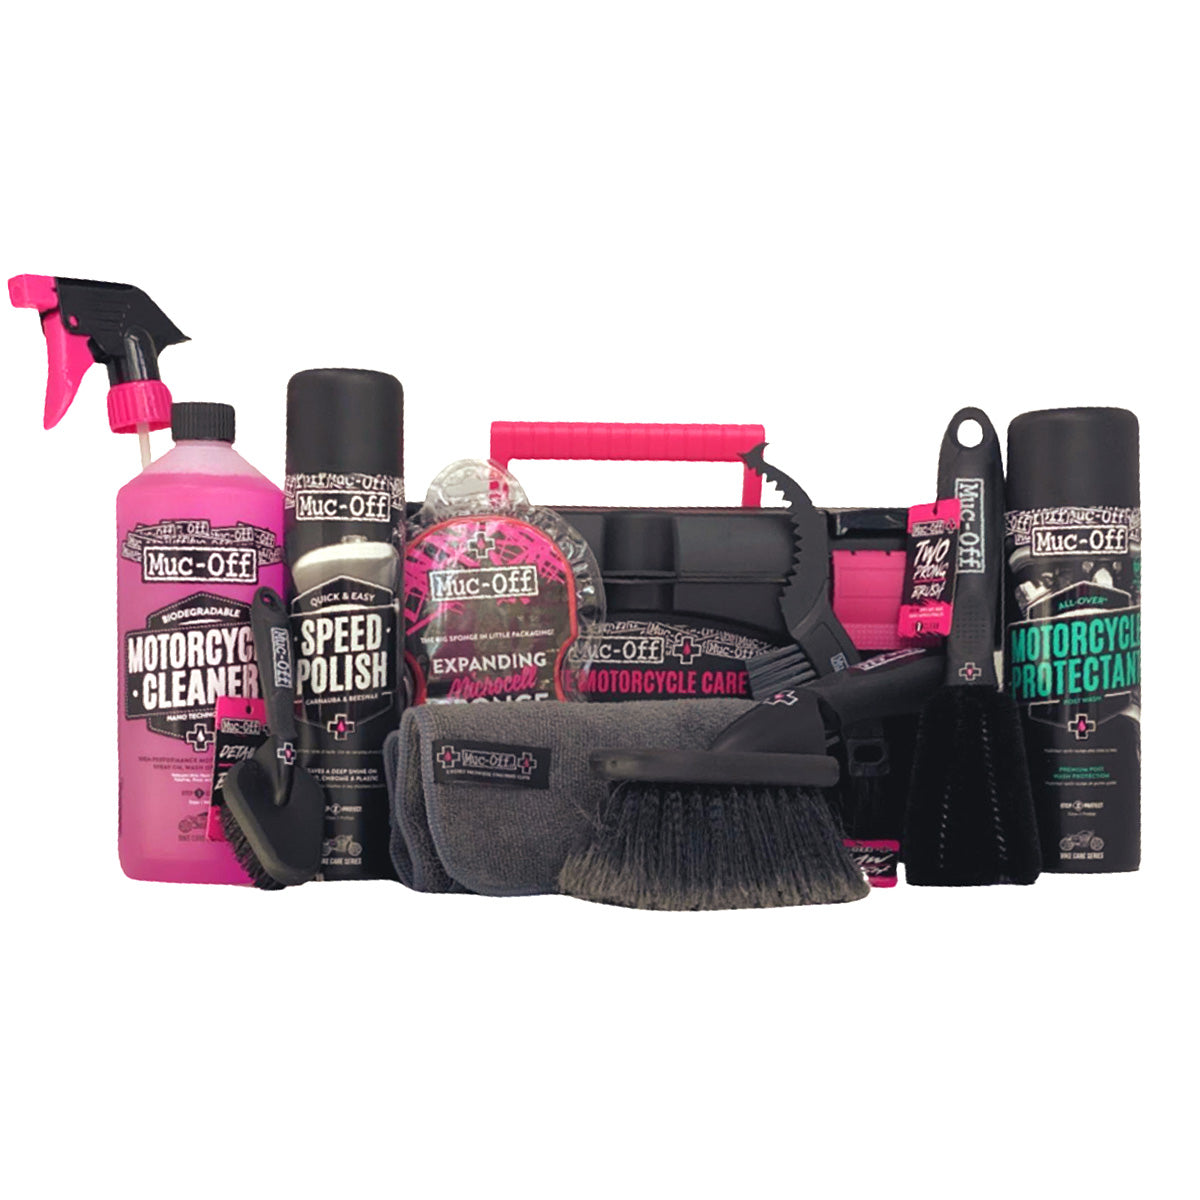 Ultimate Motorcycle Cleaning Kit by Muc-Off